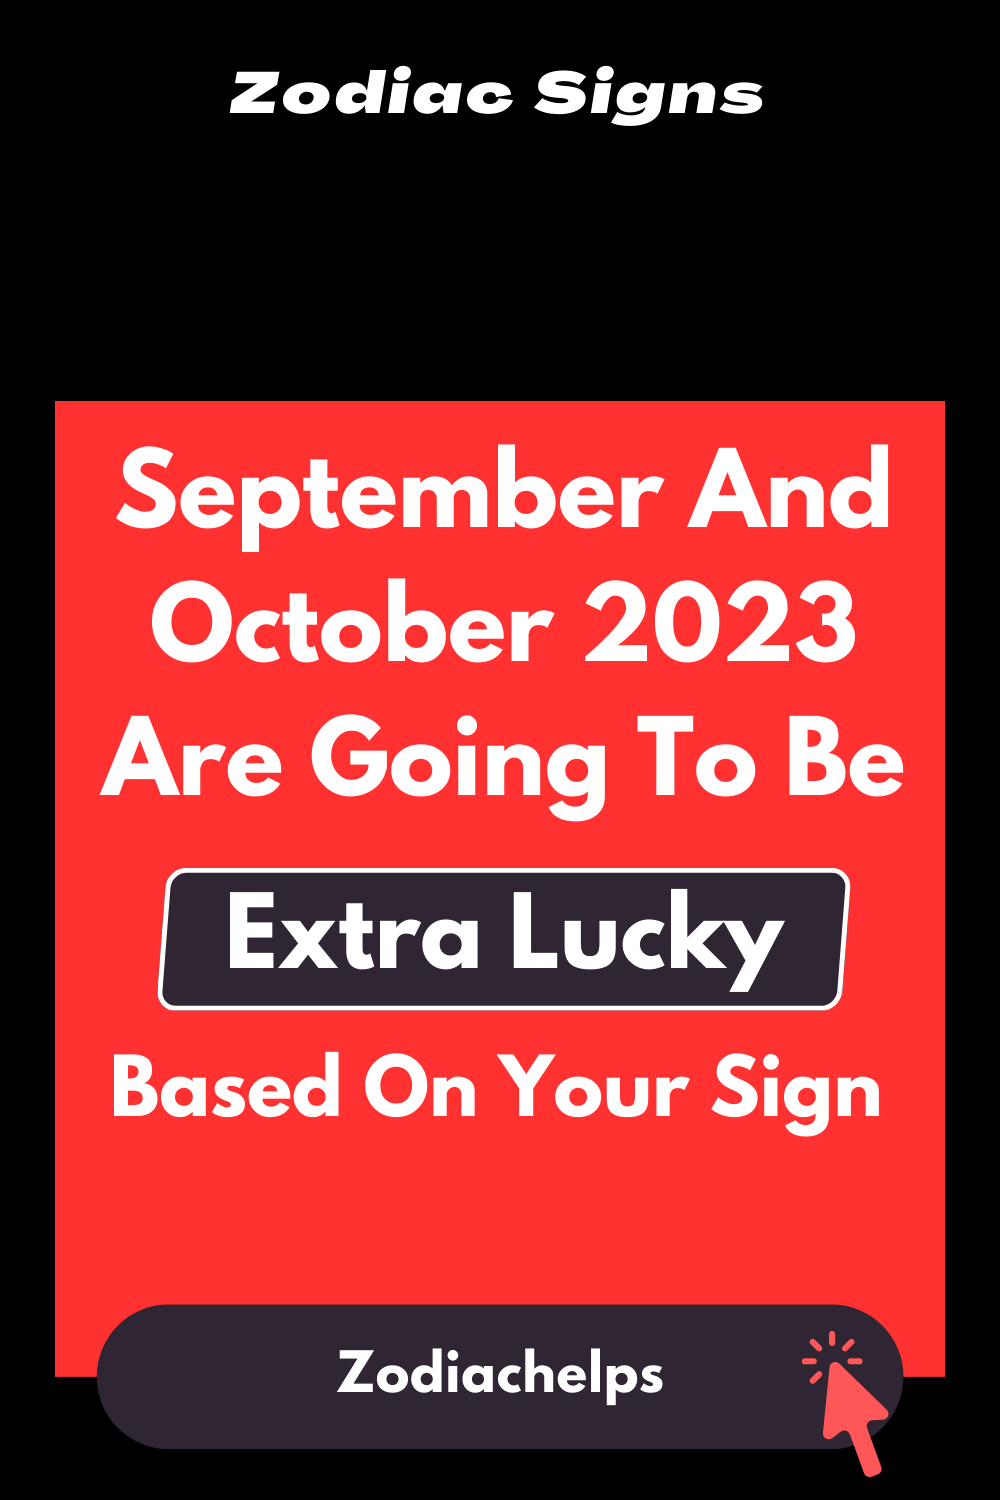 September And October 2023 Are Going To Be Extra Lucky, Based On Your Sign